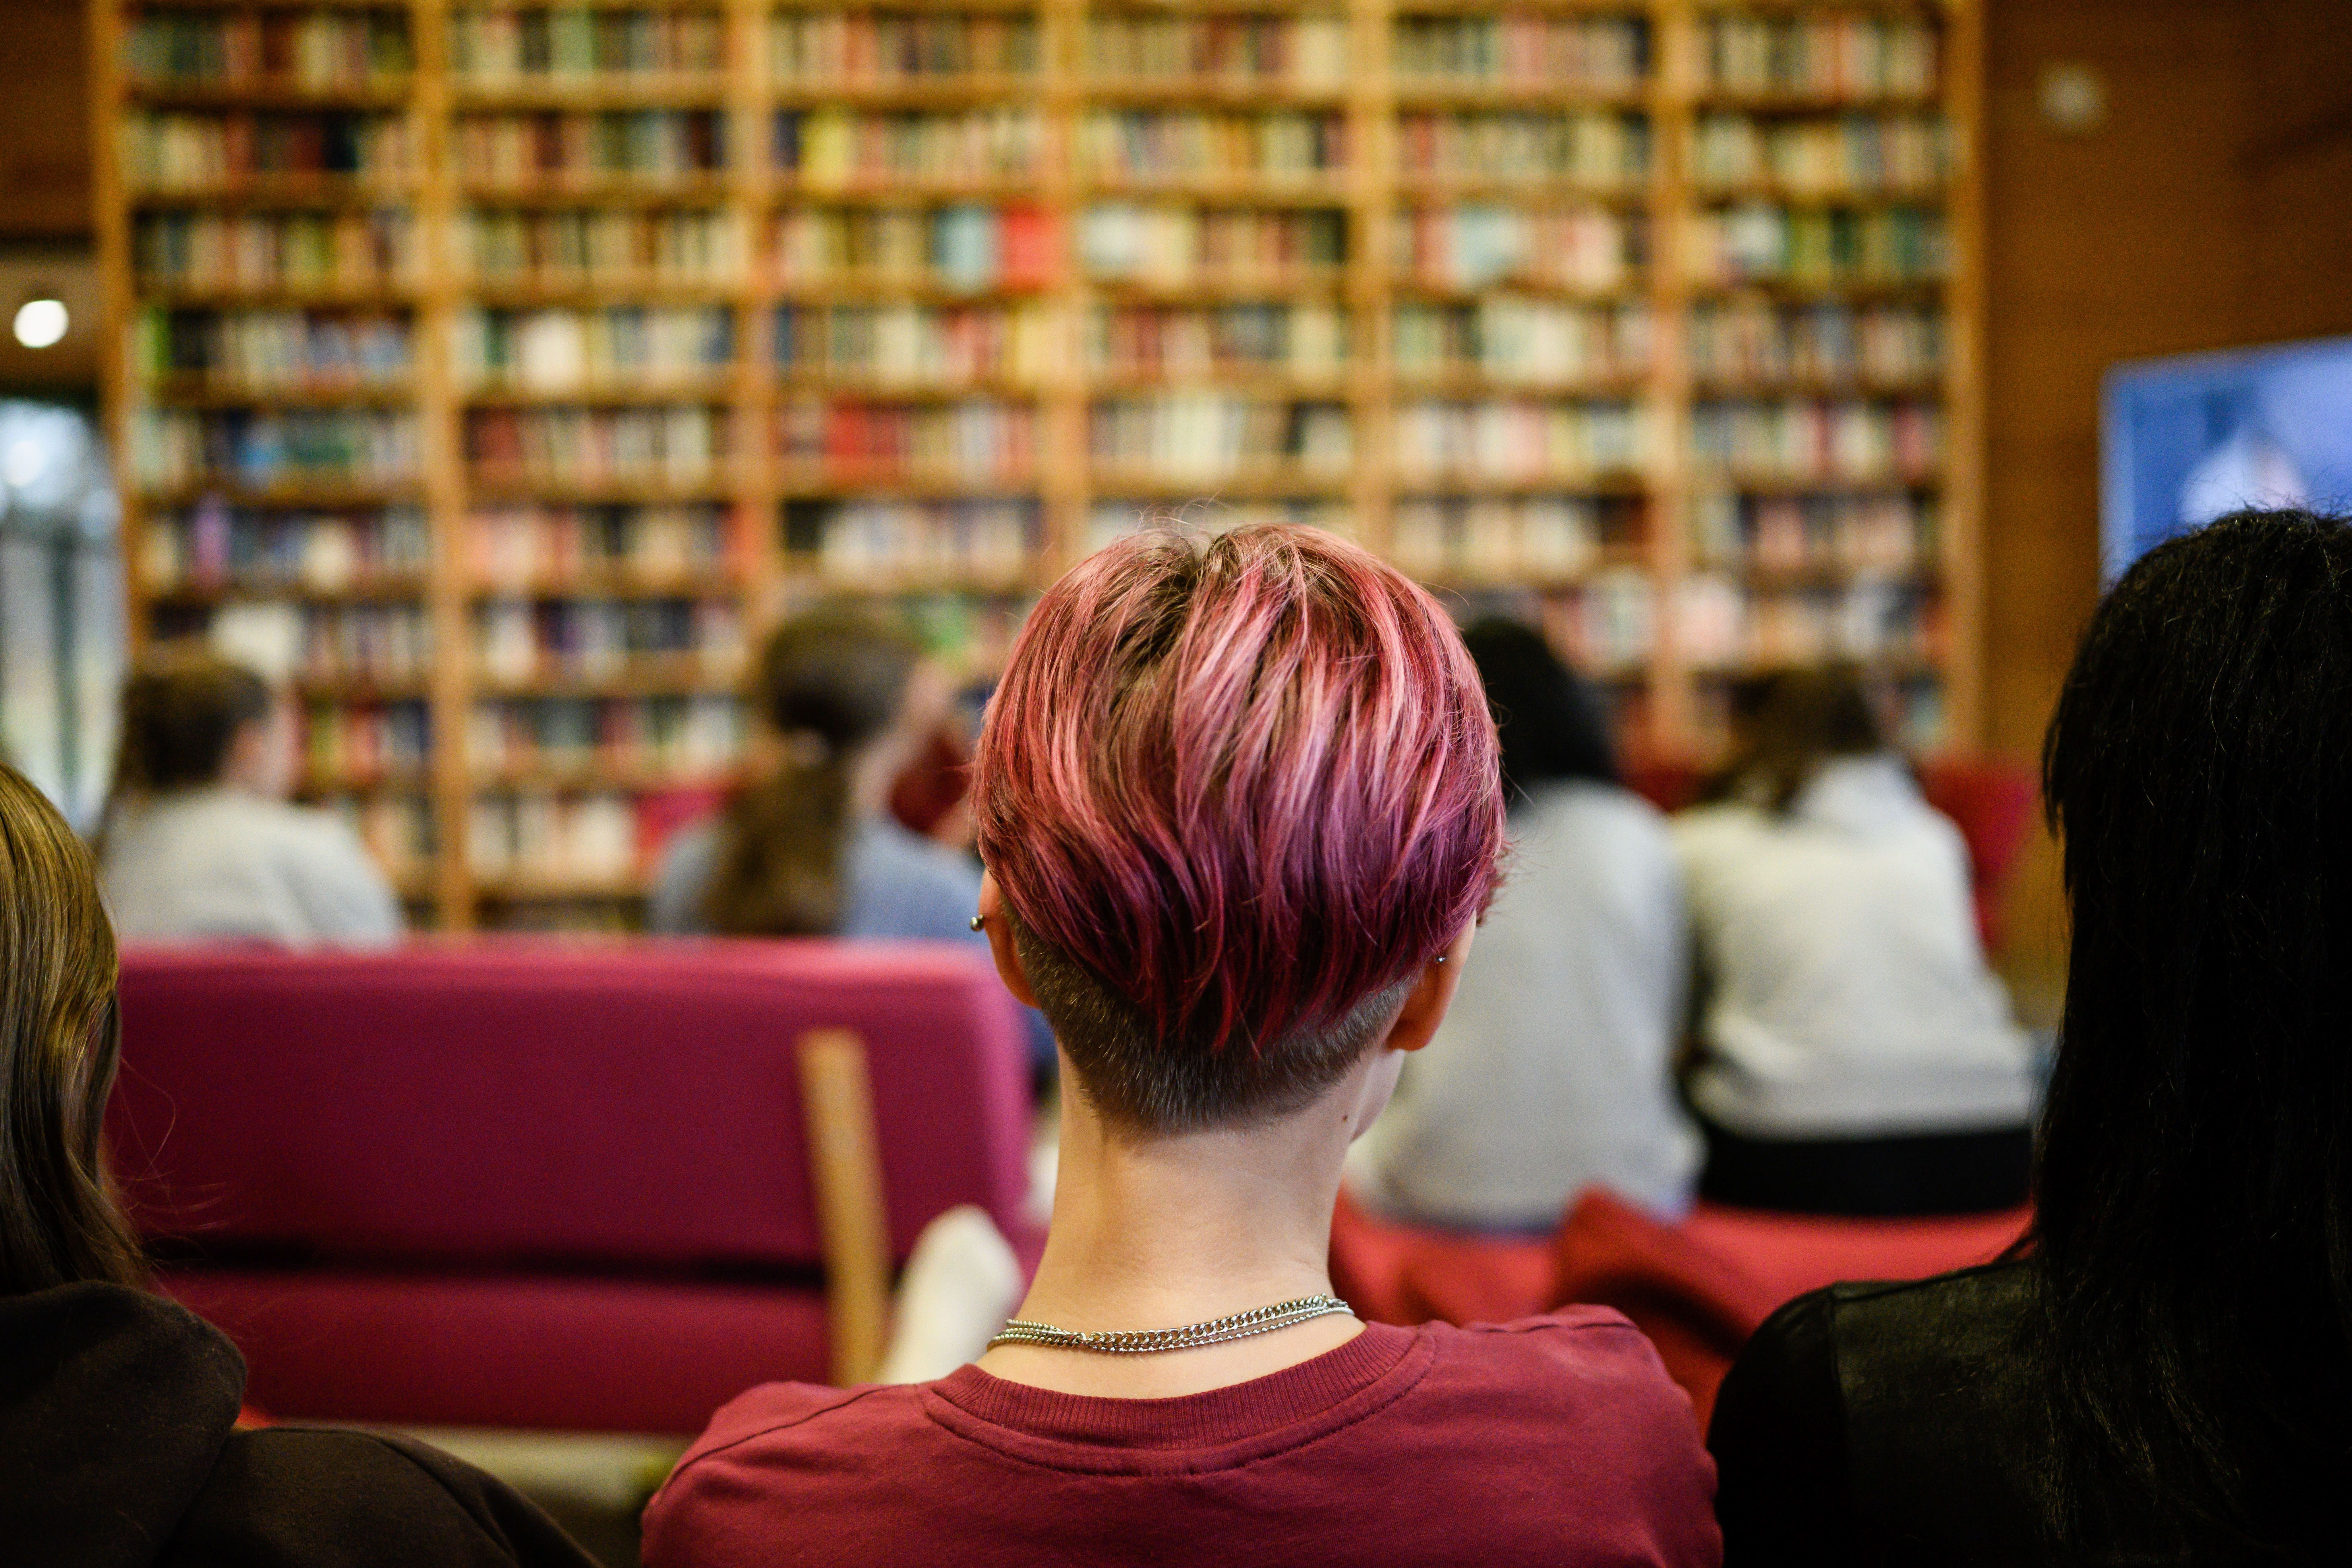  Two young people at the front of the picture. A person dressed in a red sweater with short pink hair, and a person dressed in black, sit and look ahead. Blurred image with an unknown number of people and a bookshelf in the back of the image.